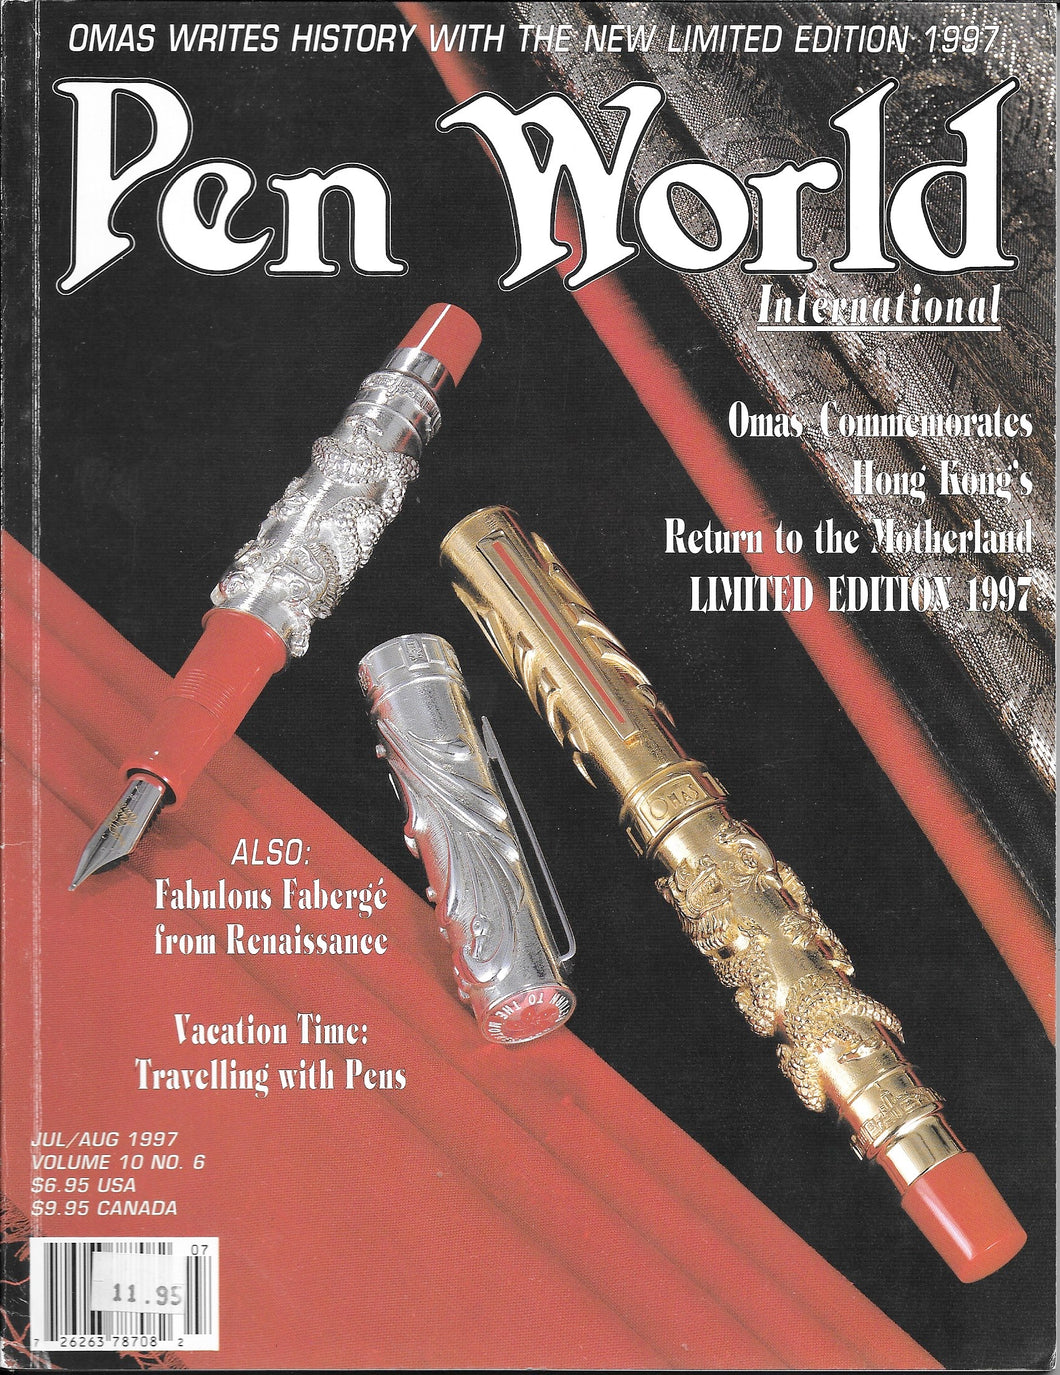 Pen World, Back Issues. July/August. 1997 Vol.10. No.6